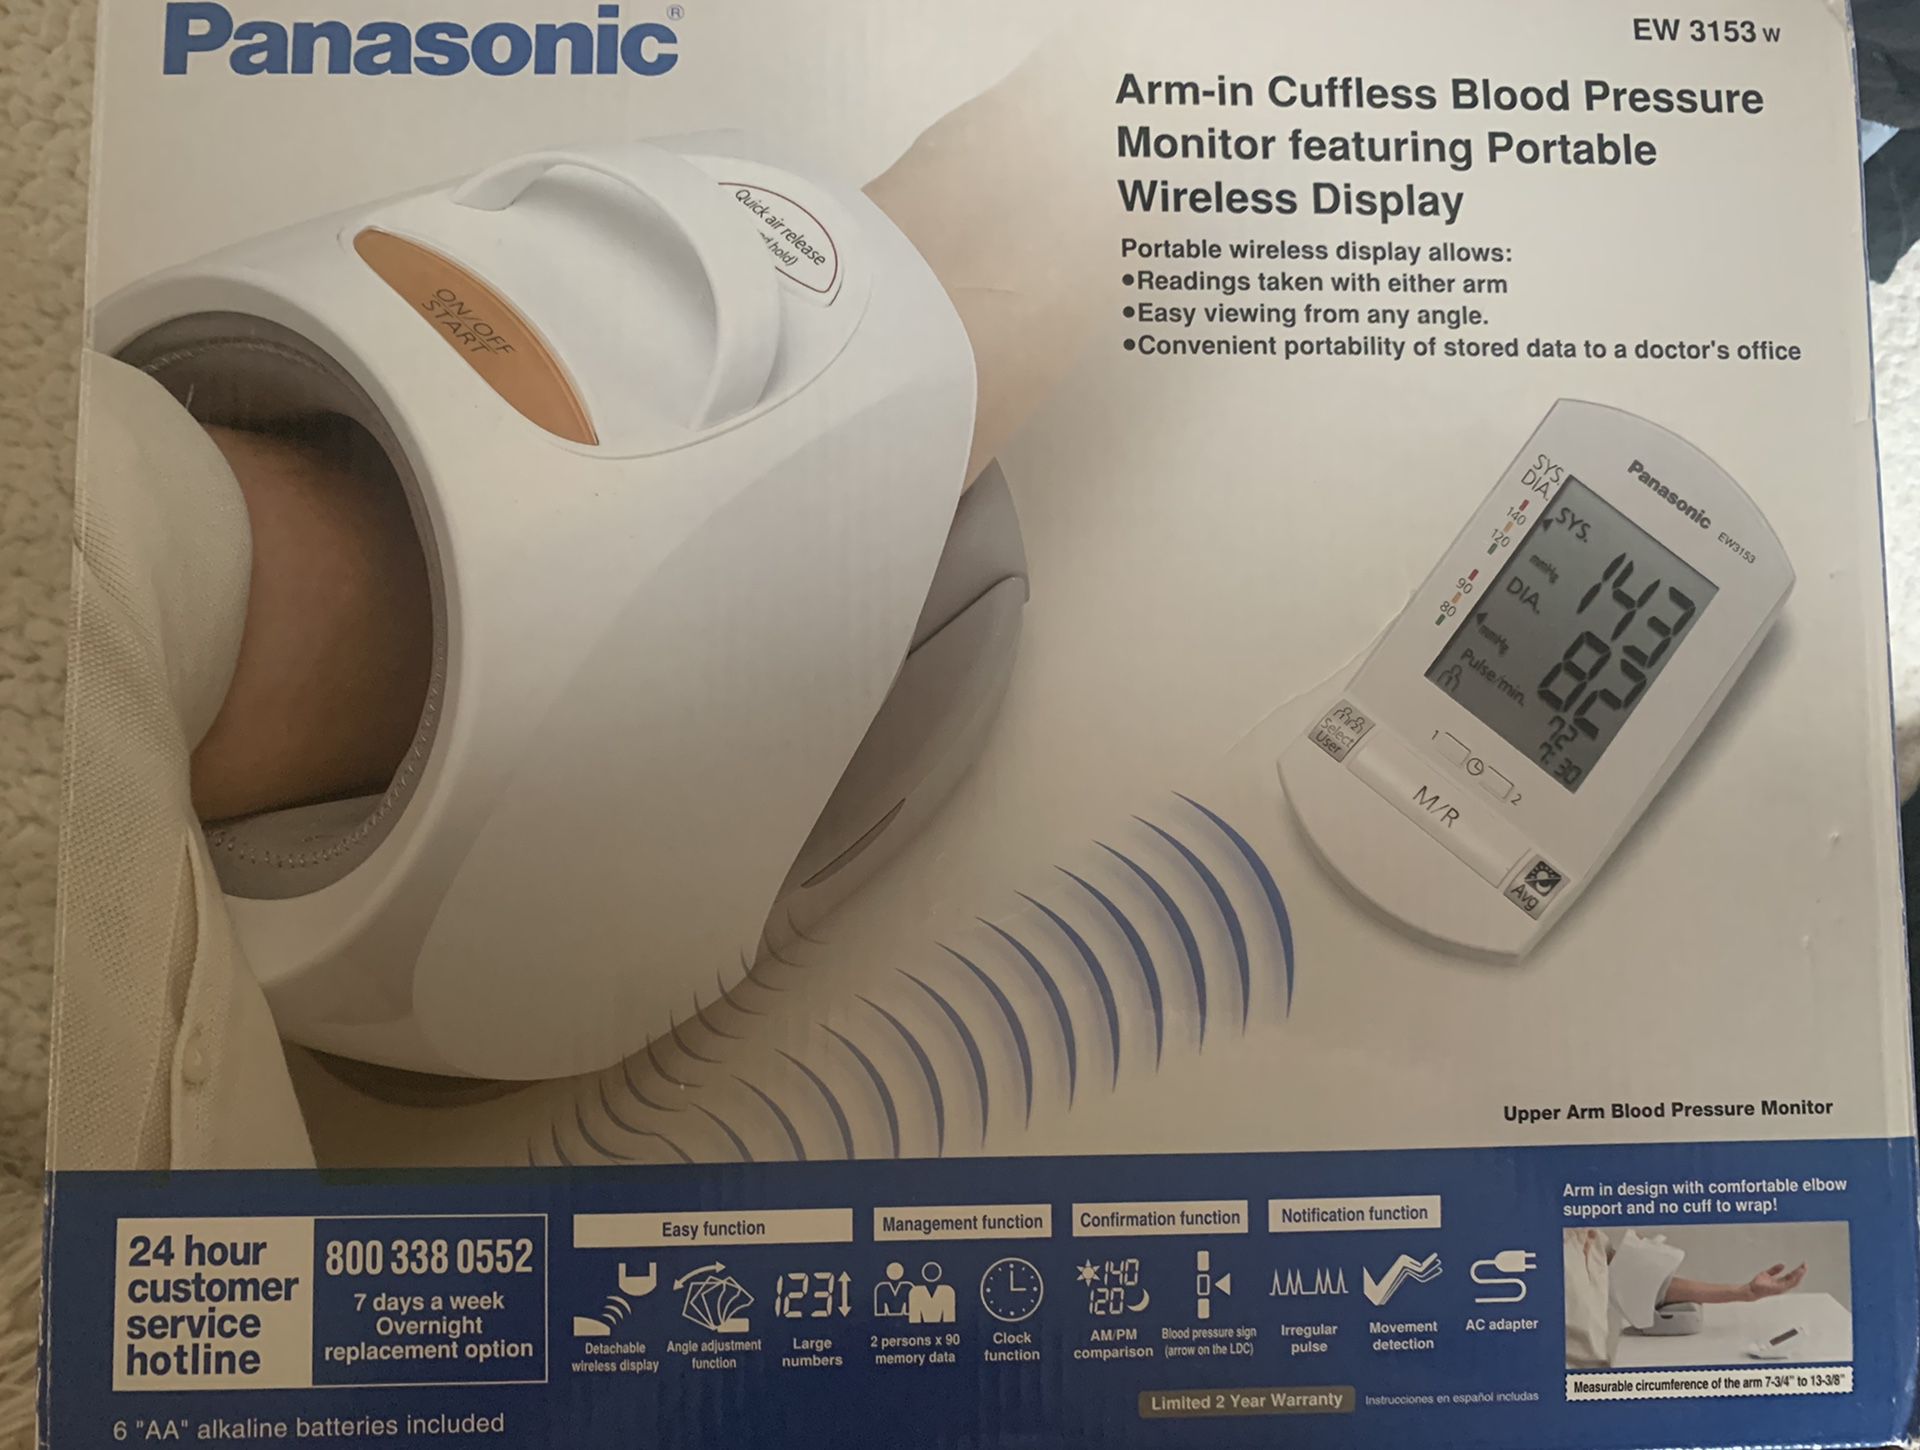 Blood Pressure Monitor with wireless display